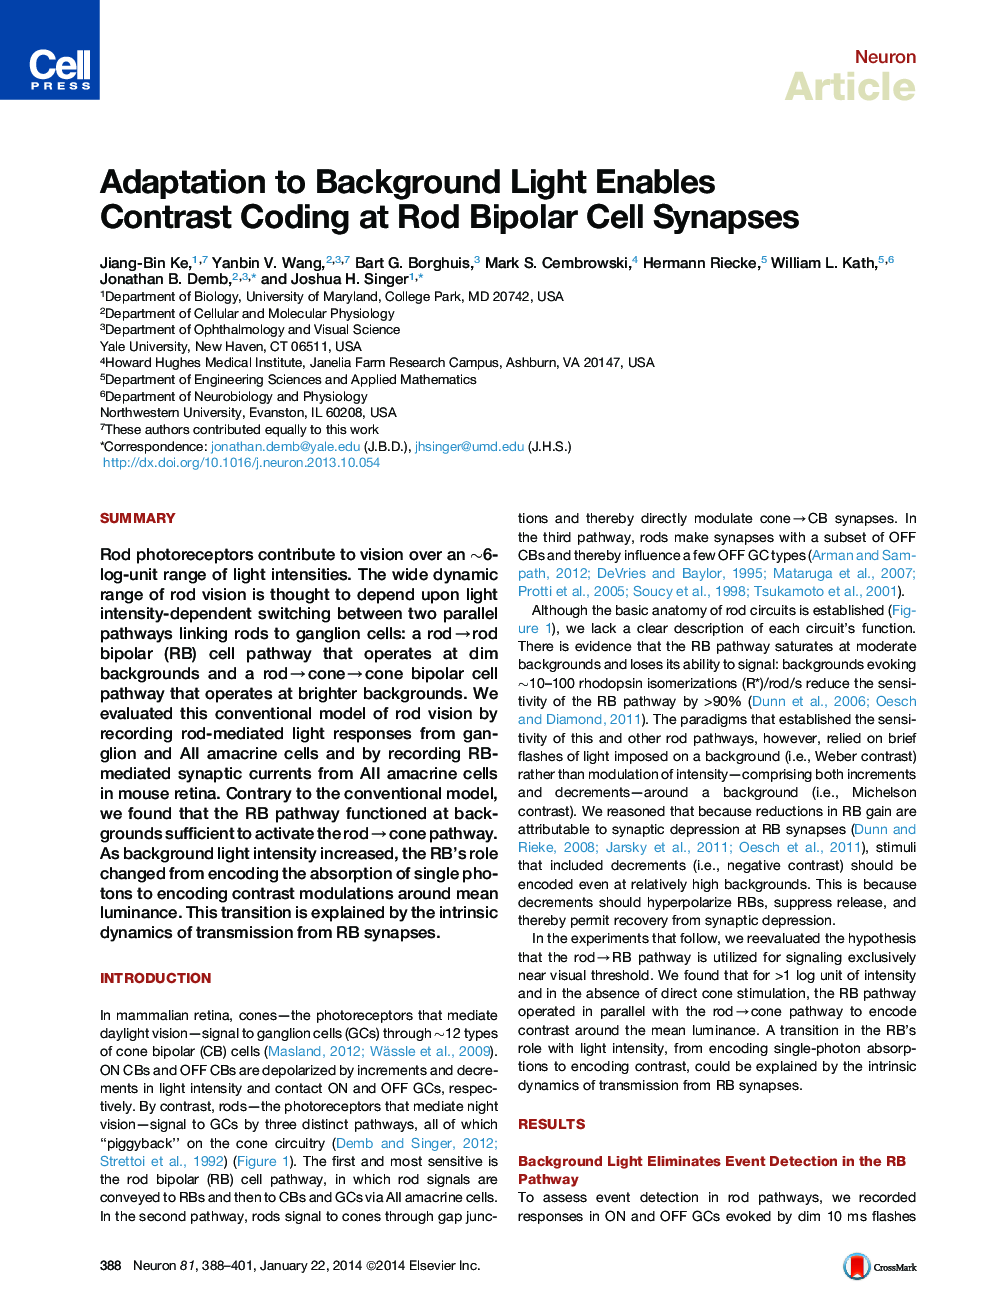 Adaptation to Background Light Enables Contrast Coding at Rod Bipolar Cell Synapses